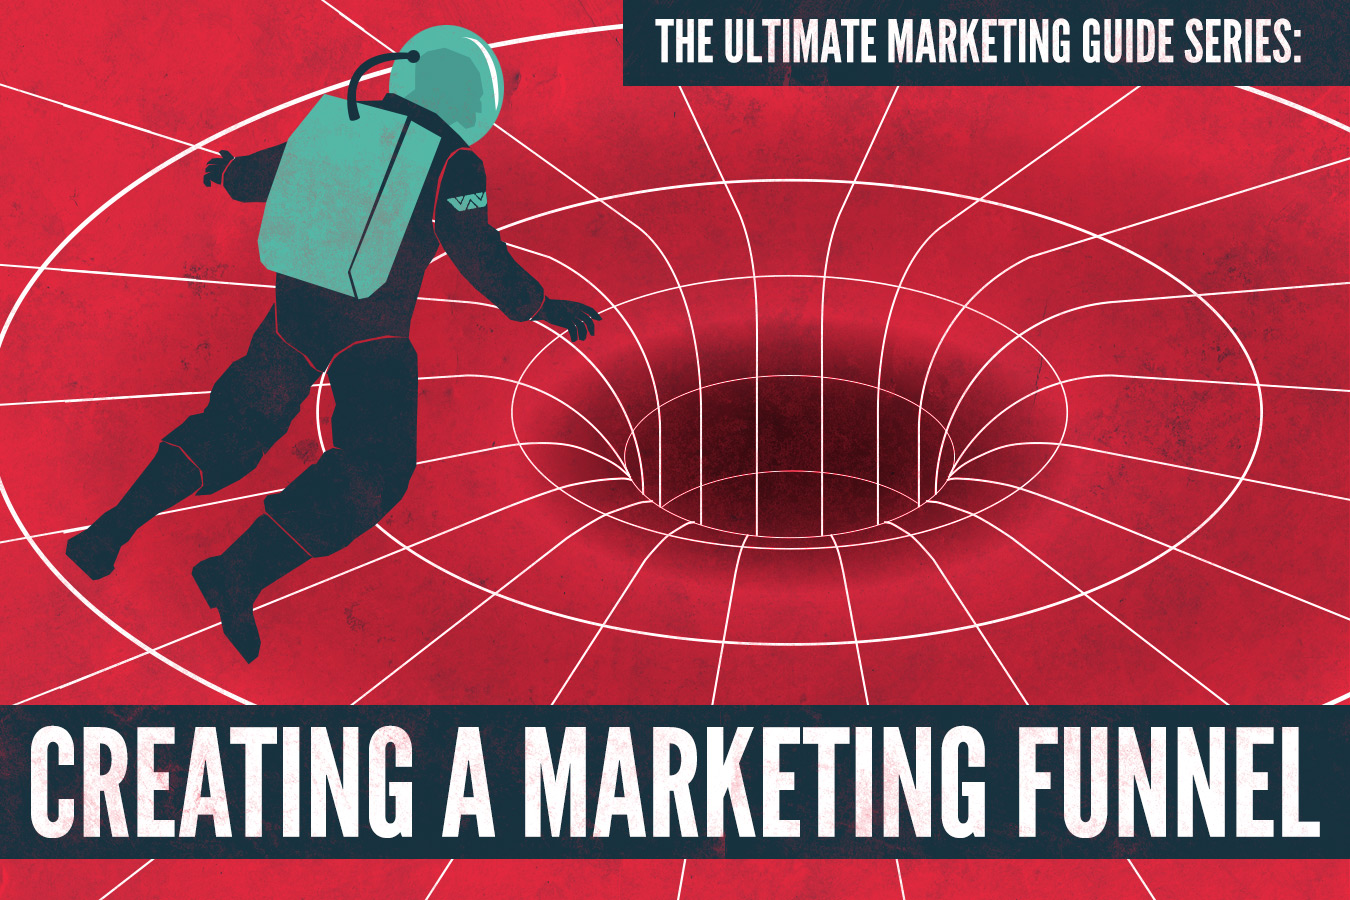 The Ultimate Marketing Guide Series: Creating a Marketing Funnel